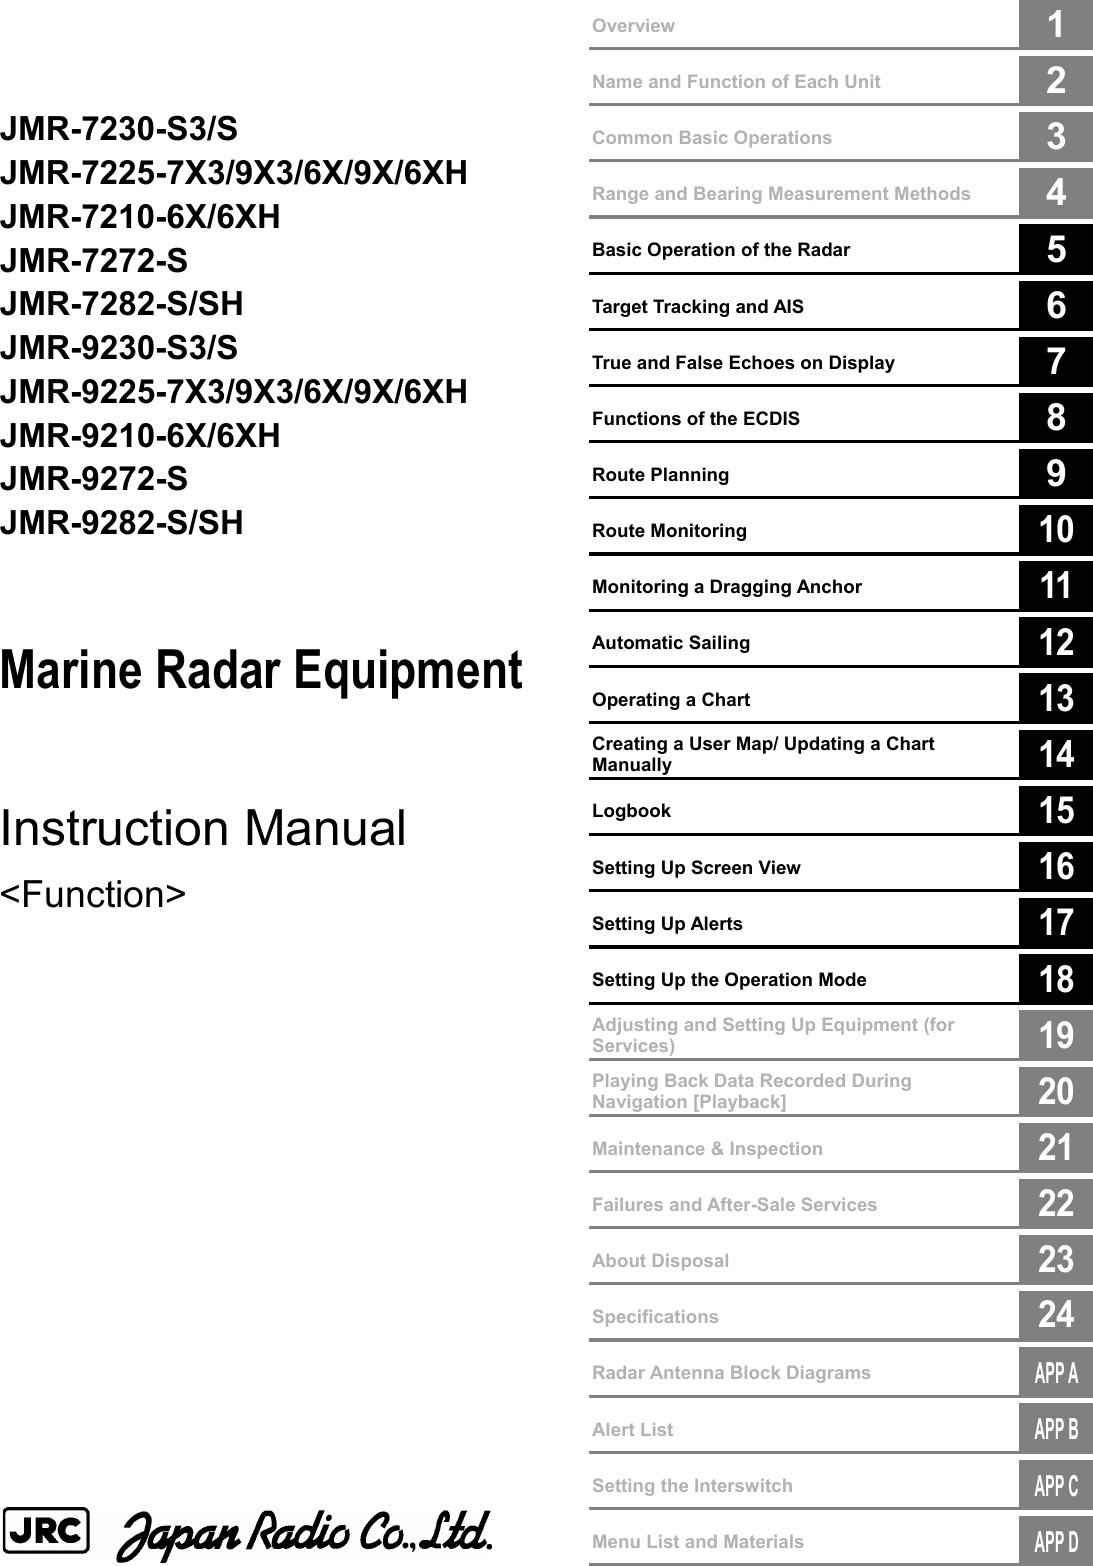        Overview  1      Name and Function of Each Unit  2      Common Basic Operations  3      Range and Bearing Measurement Methods  4        Basic Operation of the Radar  5      Target Tracking and AIS  6      True and False Echoes on Display  7        Functions of the ECDIS  8        Route Planning  9      Route Monitoring  10      Monitoring a Dragging Anchor  11      Automatic Sailing  12      Operating a Chart  13      Creating a User Map/ Updating a Chart Manually  14      Logbook  15      Setting Up Screen View  16      Setting Up Alerts  17      Setting Up the Operation Mode  18      Adjusting and Setting Up Equipment (for Services)  19      Playing Back Data Recorded During Navigation [Playback]  20        Maintenance &amp; Inspection  21        Failures and After-Sale Services  22        About Disposal  23        Specifications  24         Radar Antenna Block Diagrams  APP A       Alert List  APP B       Setting the Interswitch  APP C       Menu List and Materials  APP D      JMR-7230-S3/S JMR-7225-7X3/9X3/6X/9X/6XH JMR-7210-6X/6XH JMR-7272-S JMR-7282-S/SH JMR-9230-S3/S JMR-9225-7X3/9X3/6X/9X/6XH JMR-9210-6X/6XH JMR-9272-S JMR-9282-S/SH   Marine Radar Equipment   Instruction Manual  &lt;Function&gt;                     